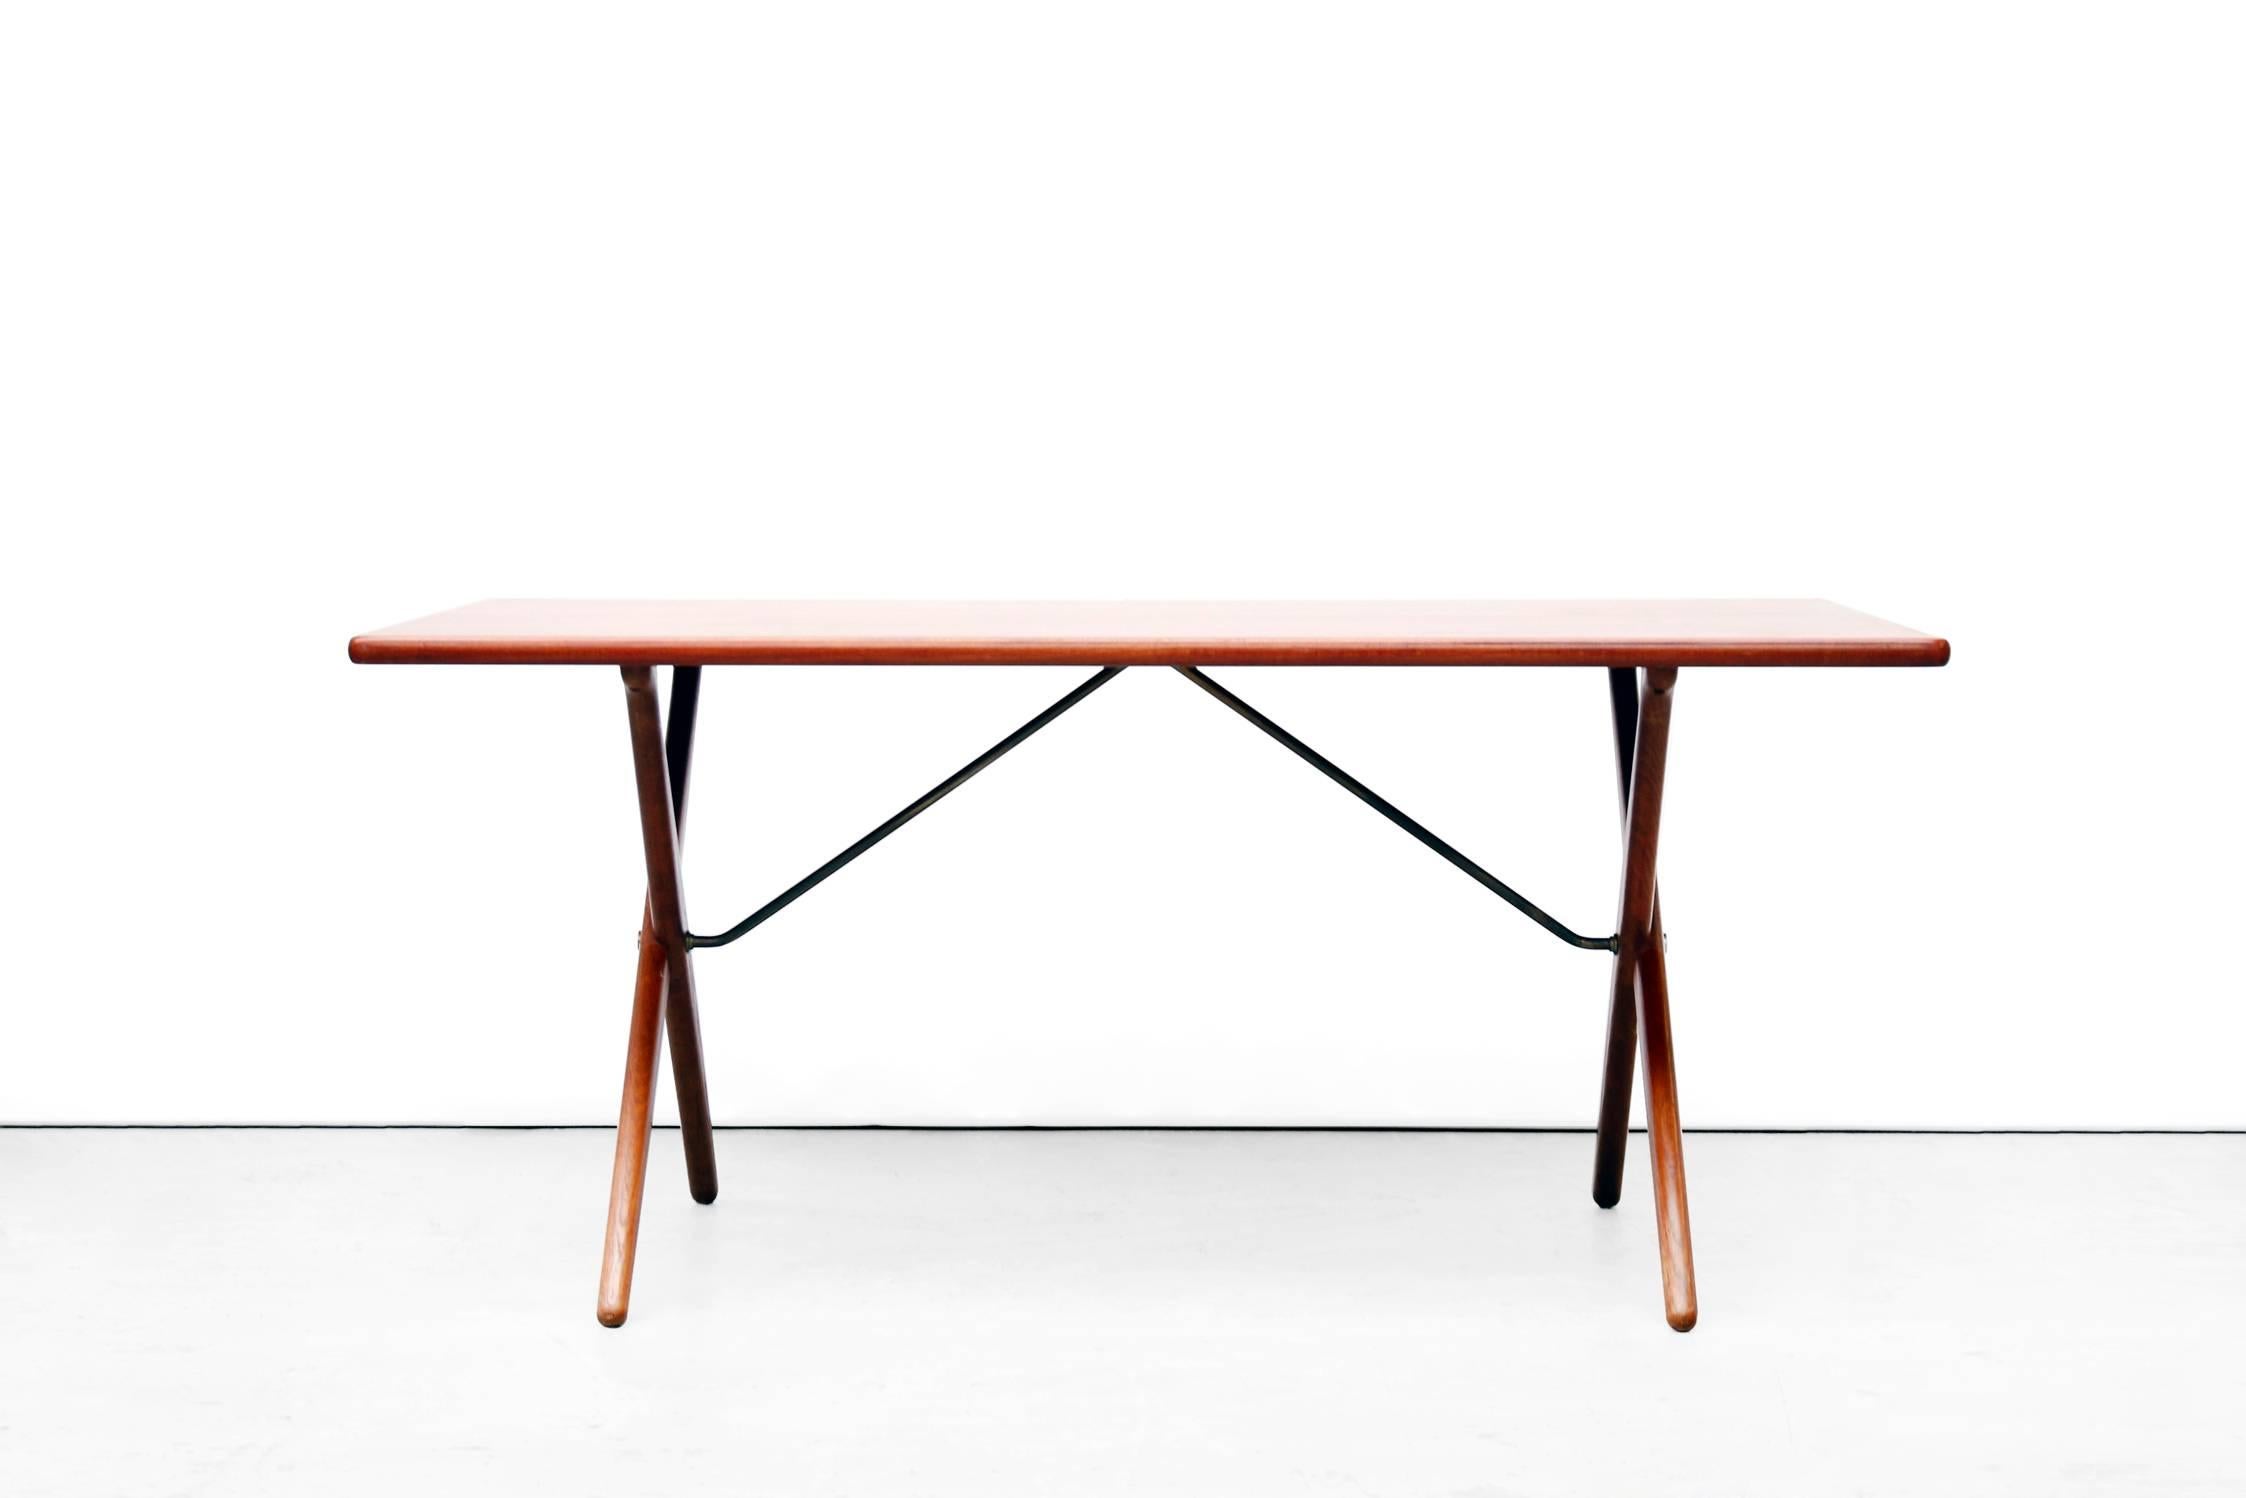 Beautiful dining table AT303, designed by Hans Wegner and produced by Andreas Tuck in the early 1950s. The table legs are made of solid oak and supported by beautiful brass brackets. The table top is teak.
The table, which can also be used as an